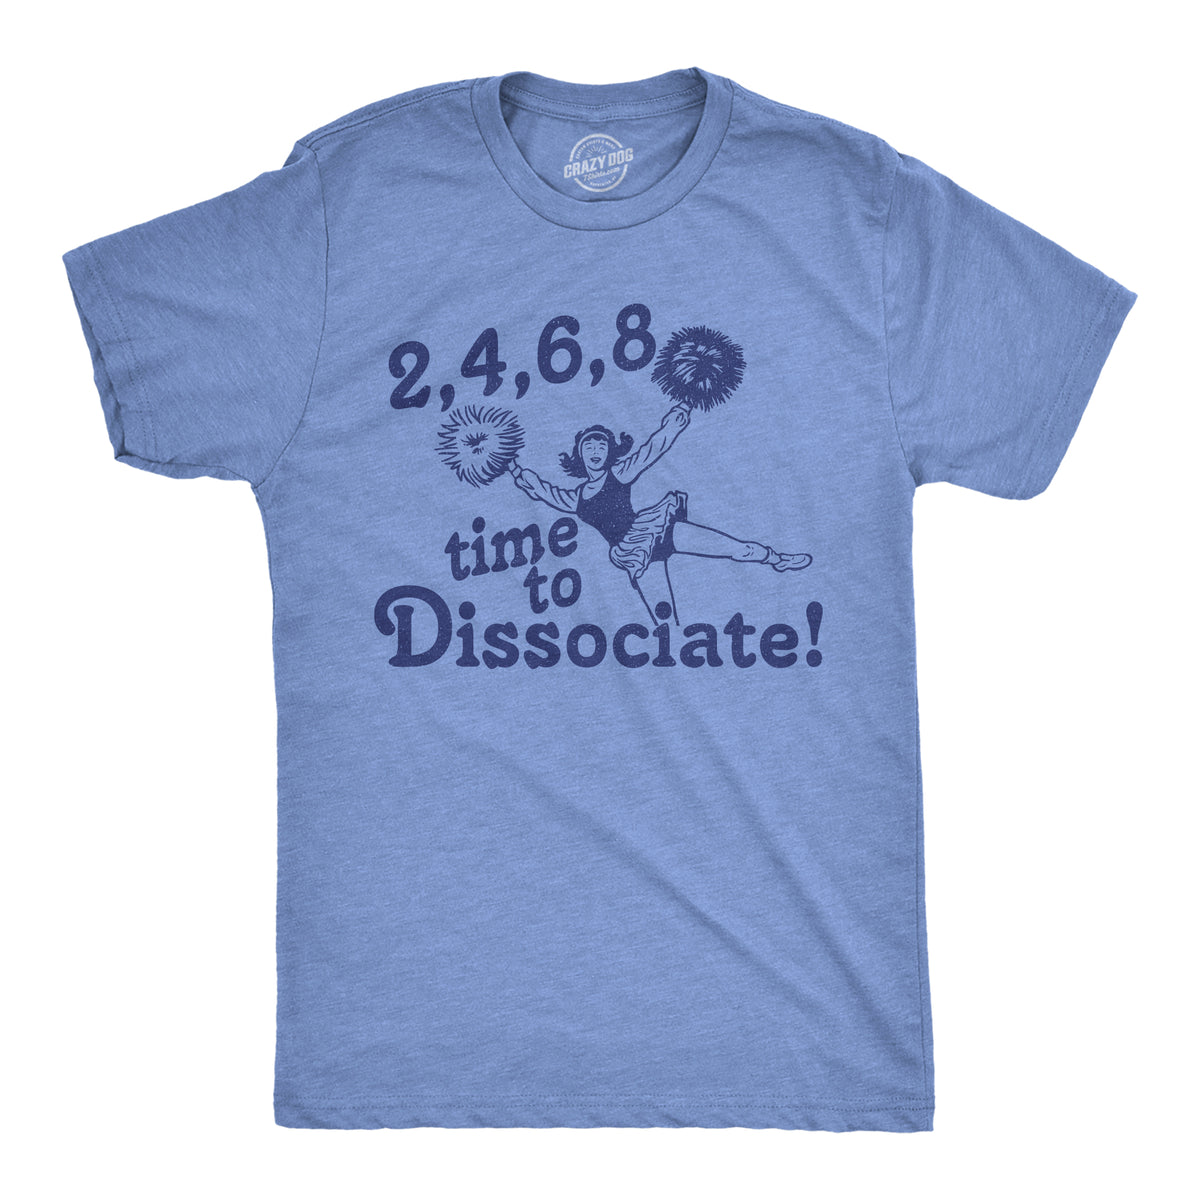 Funny Light Heather Blue - Time To Dissociate 2 4 6 8 Time To Dissociate Mens T Shirt Nerdy Sarcastic Introvert Tee